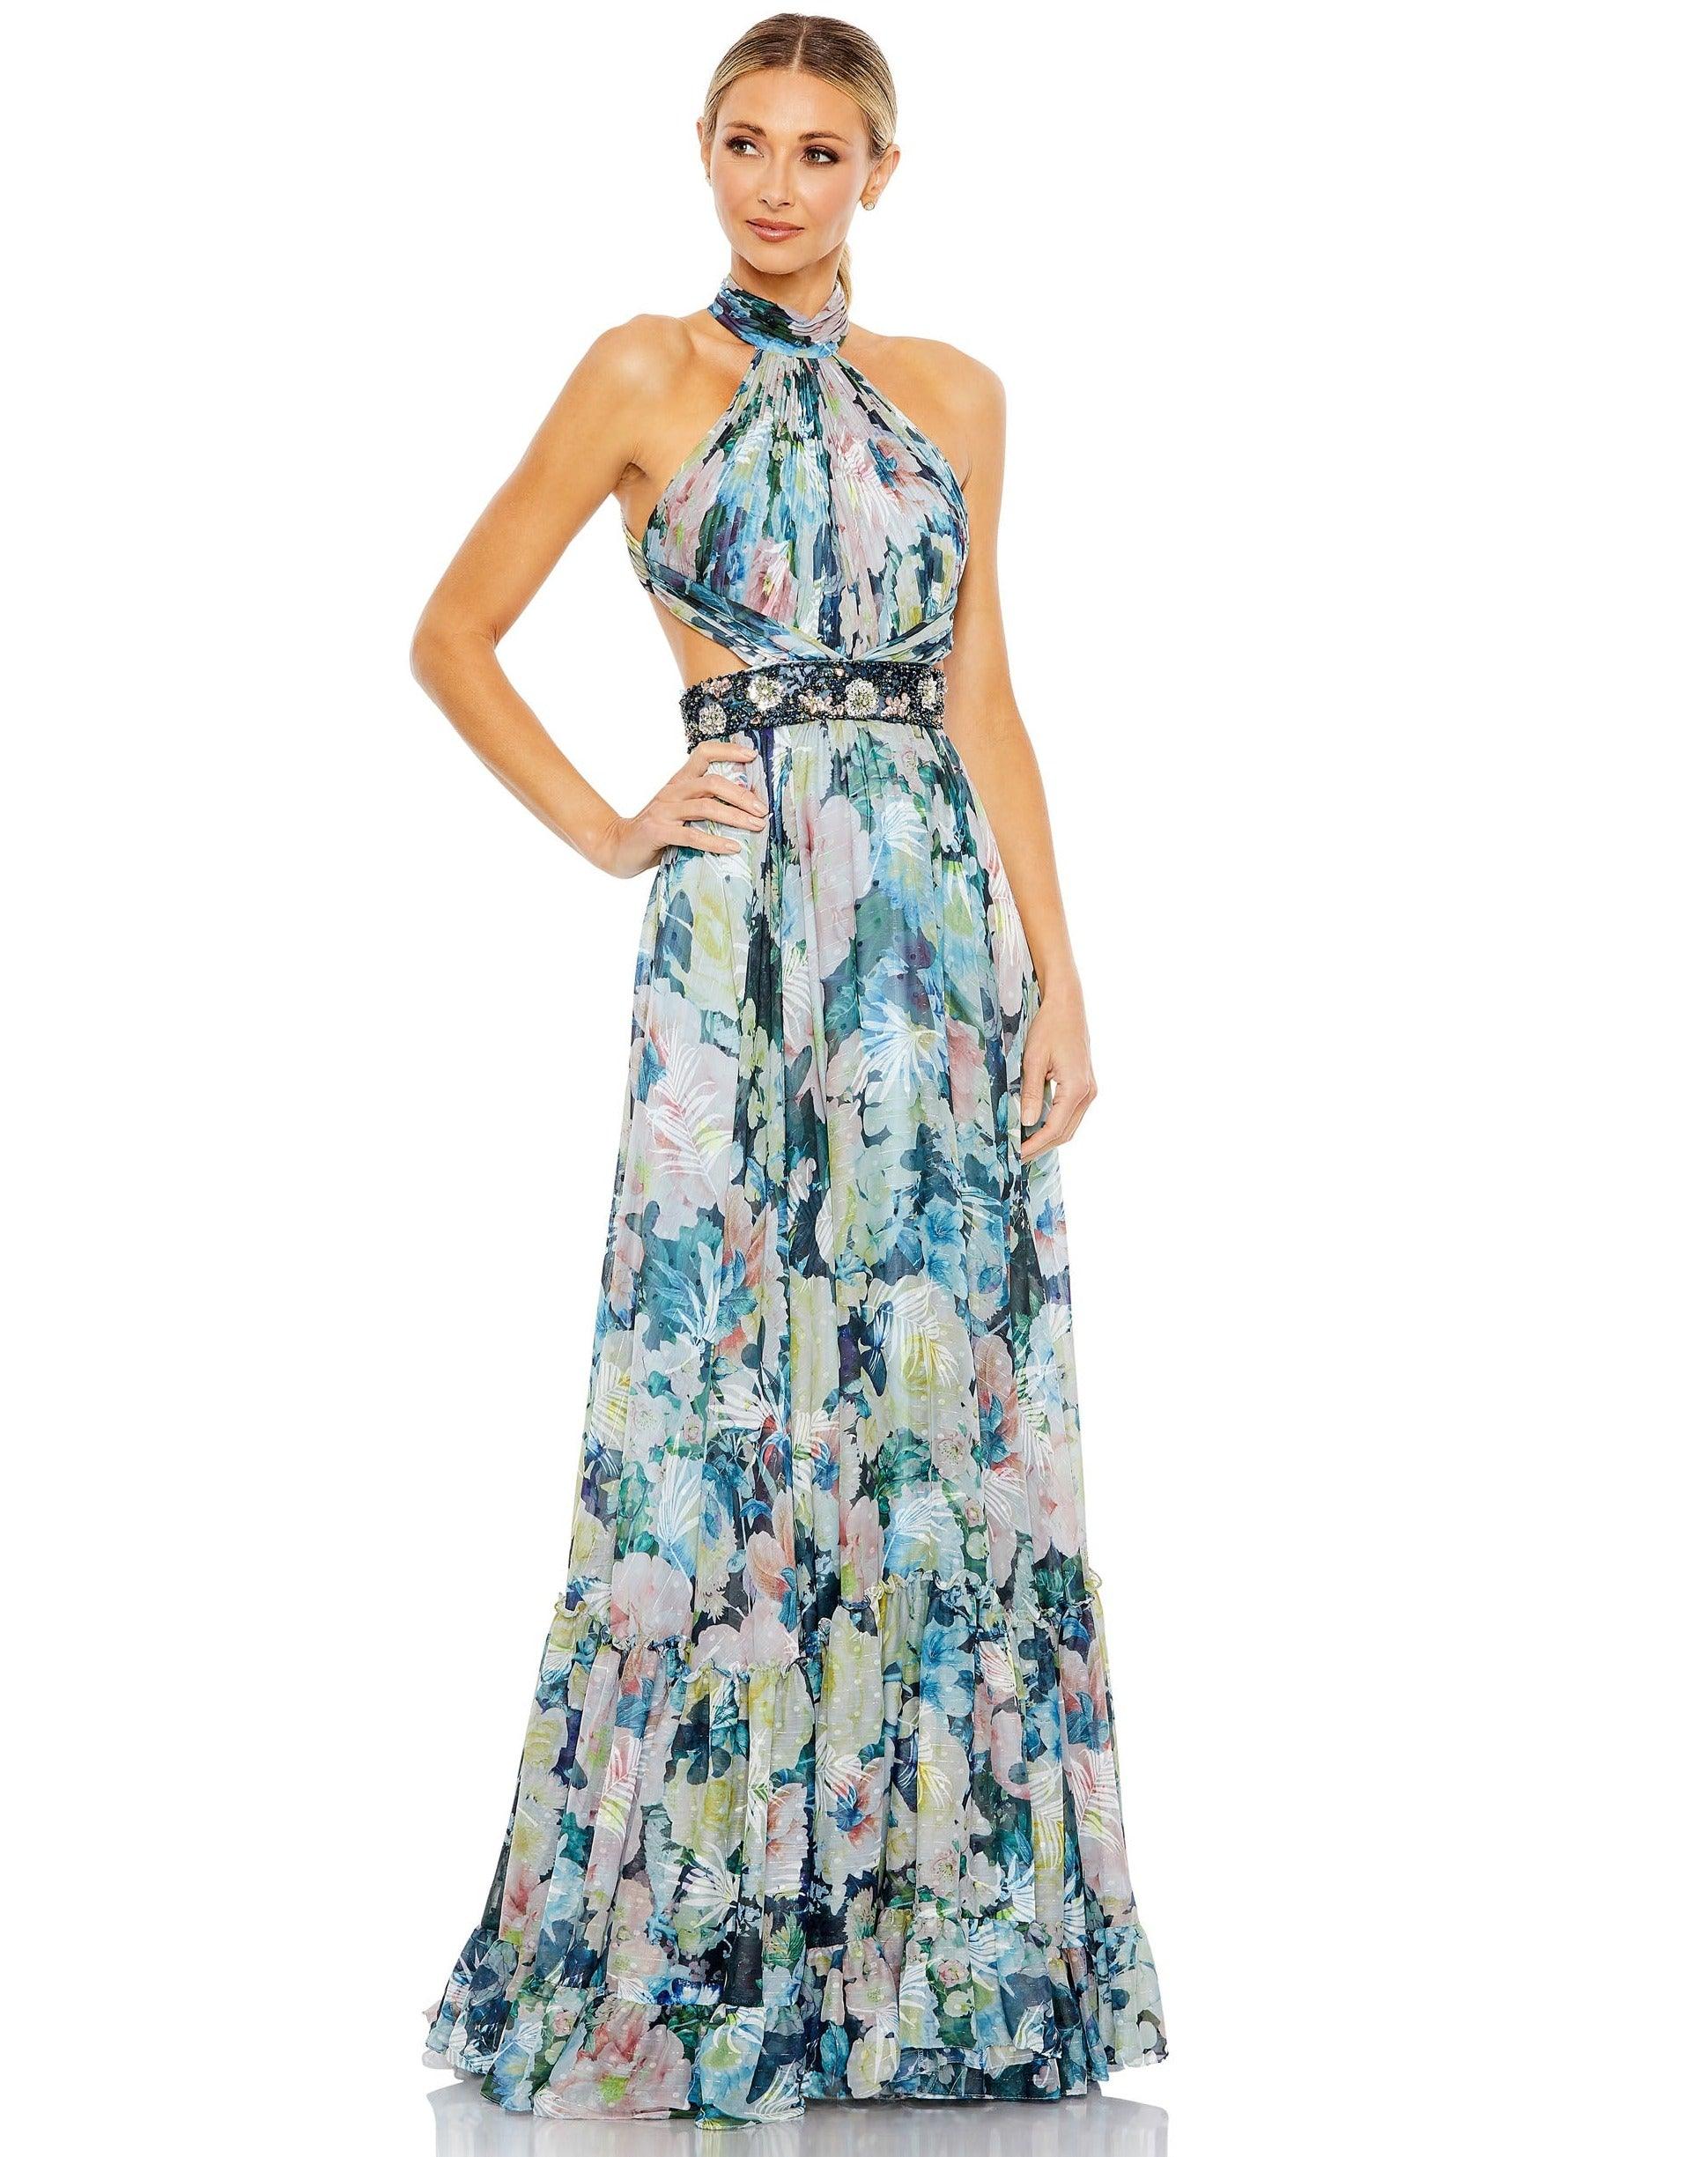 Prom or Formel Halter Maxi Dress - Bags and purses